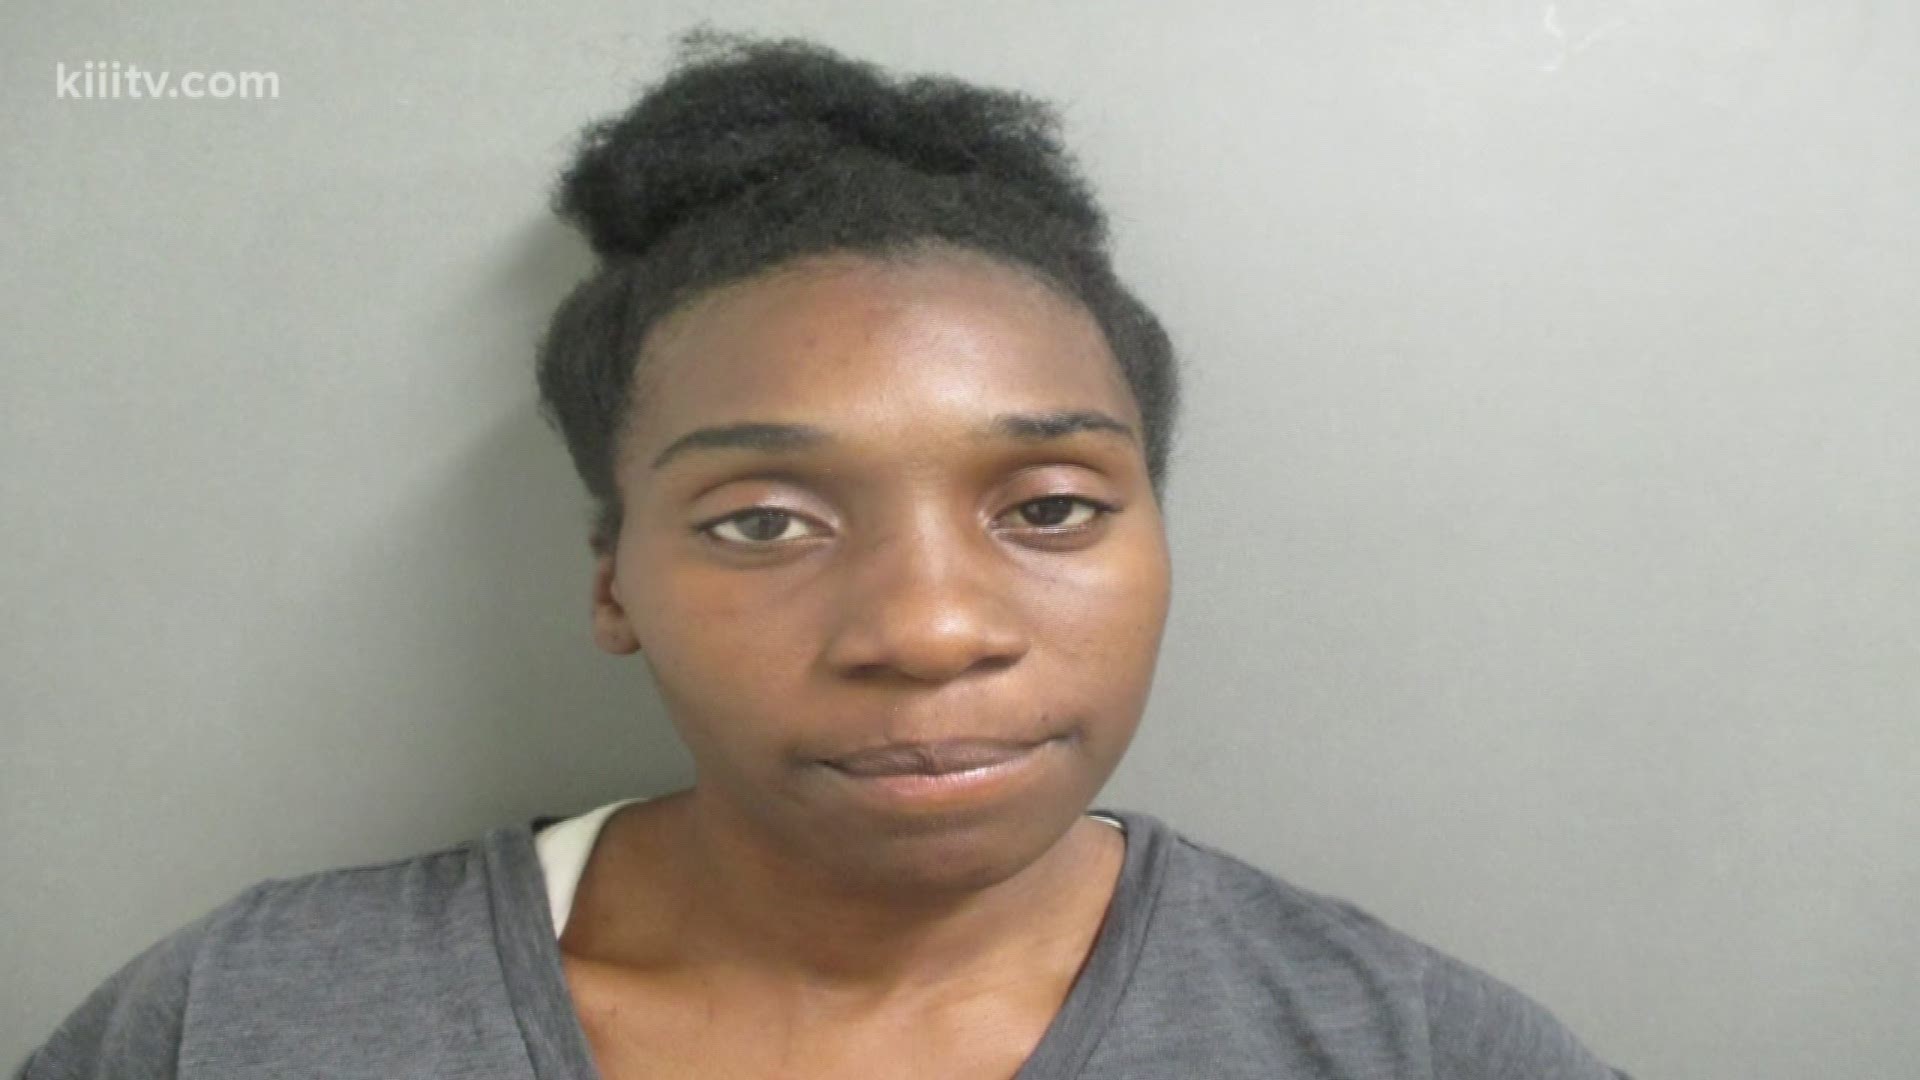 A Gregory, Texas, woman is behind bars accused of capital murder in connection with the death her four-year-old child.

According to the San Patricio County Sheriff's Office, 26-year-old Tawana Roberson was arrested Thursday by Texas Rangers and charged with capital murder. She is currently in the San Patricio County Jail on a $400,000 bond.